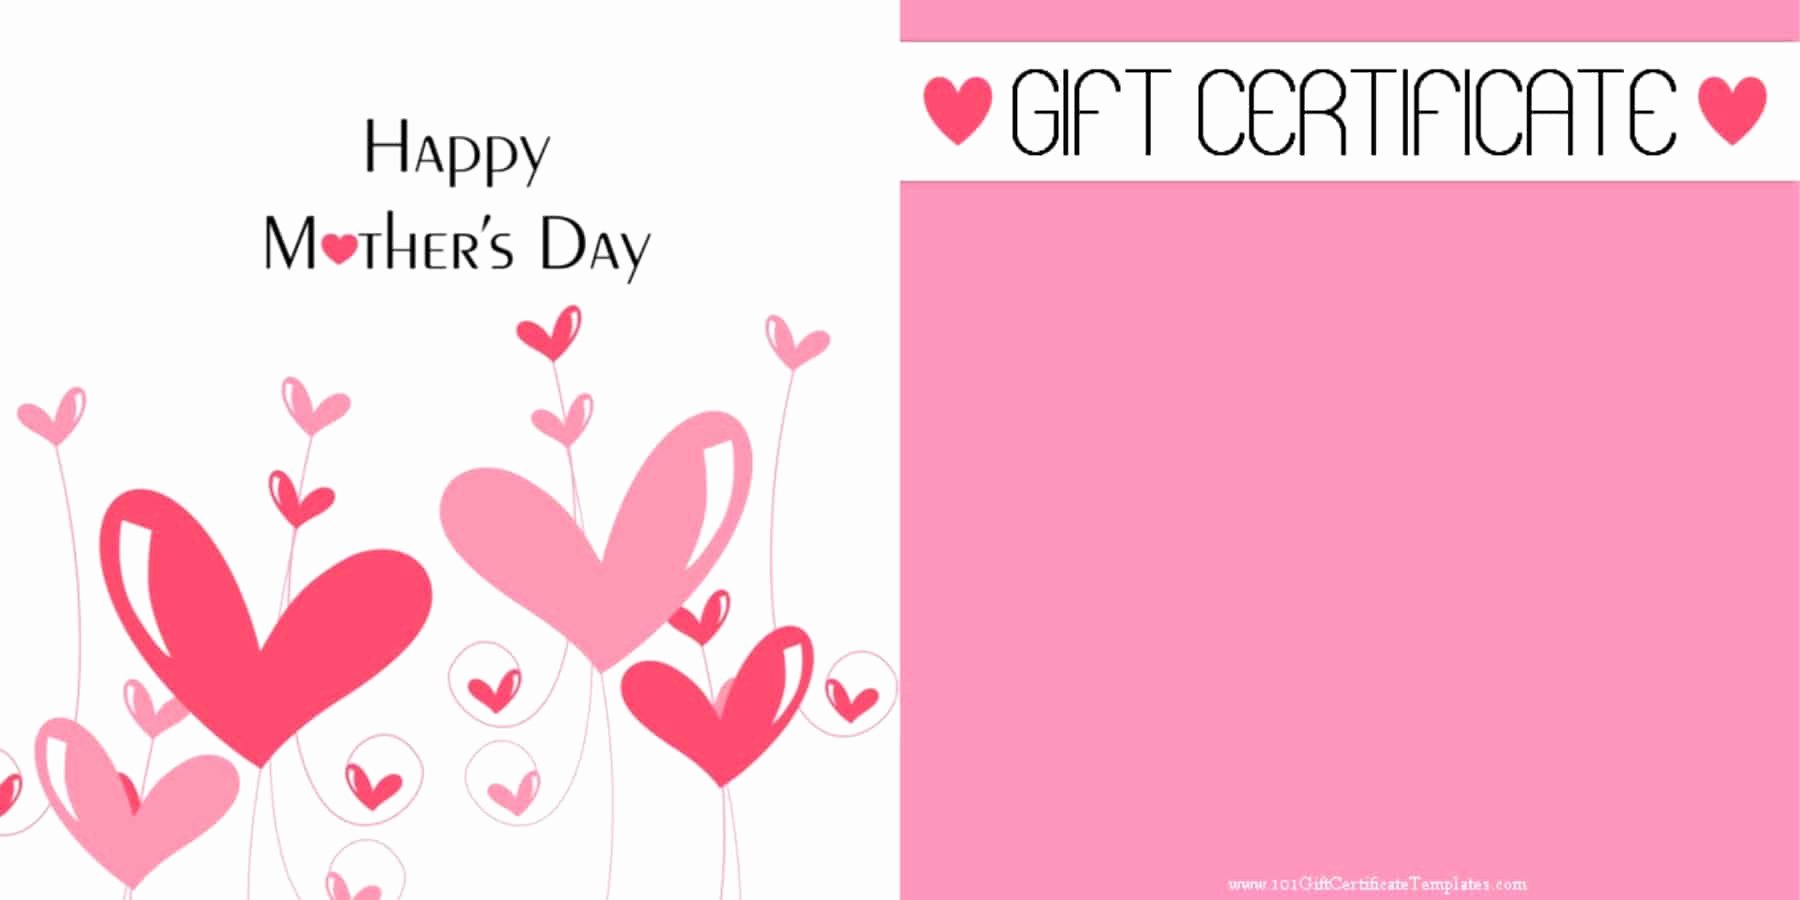 Mothers Day Certificate Template New Mother S Day Gift Certificate Templates